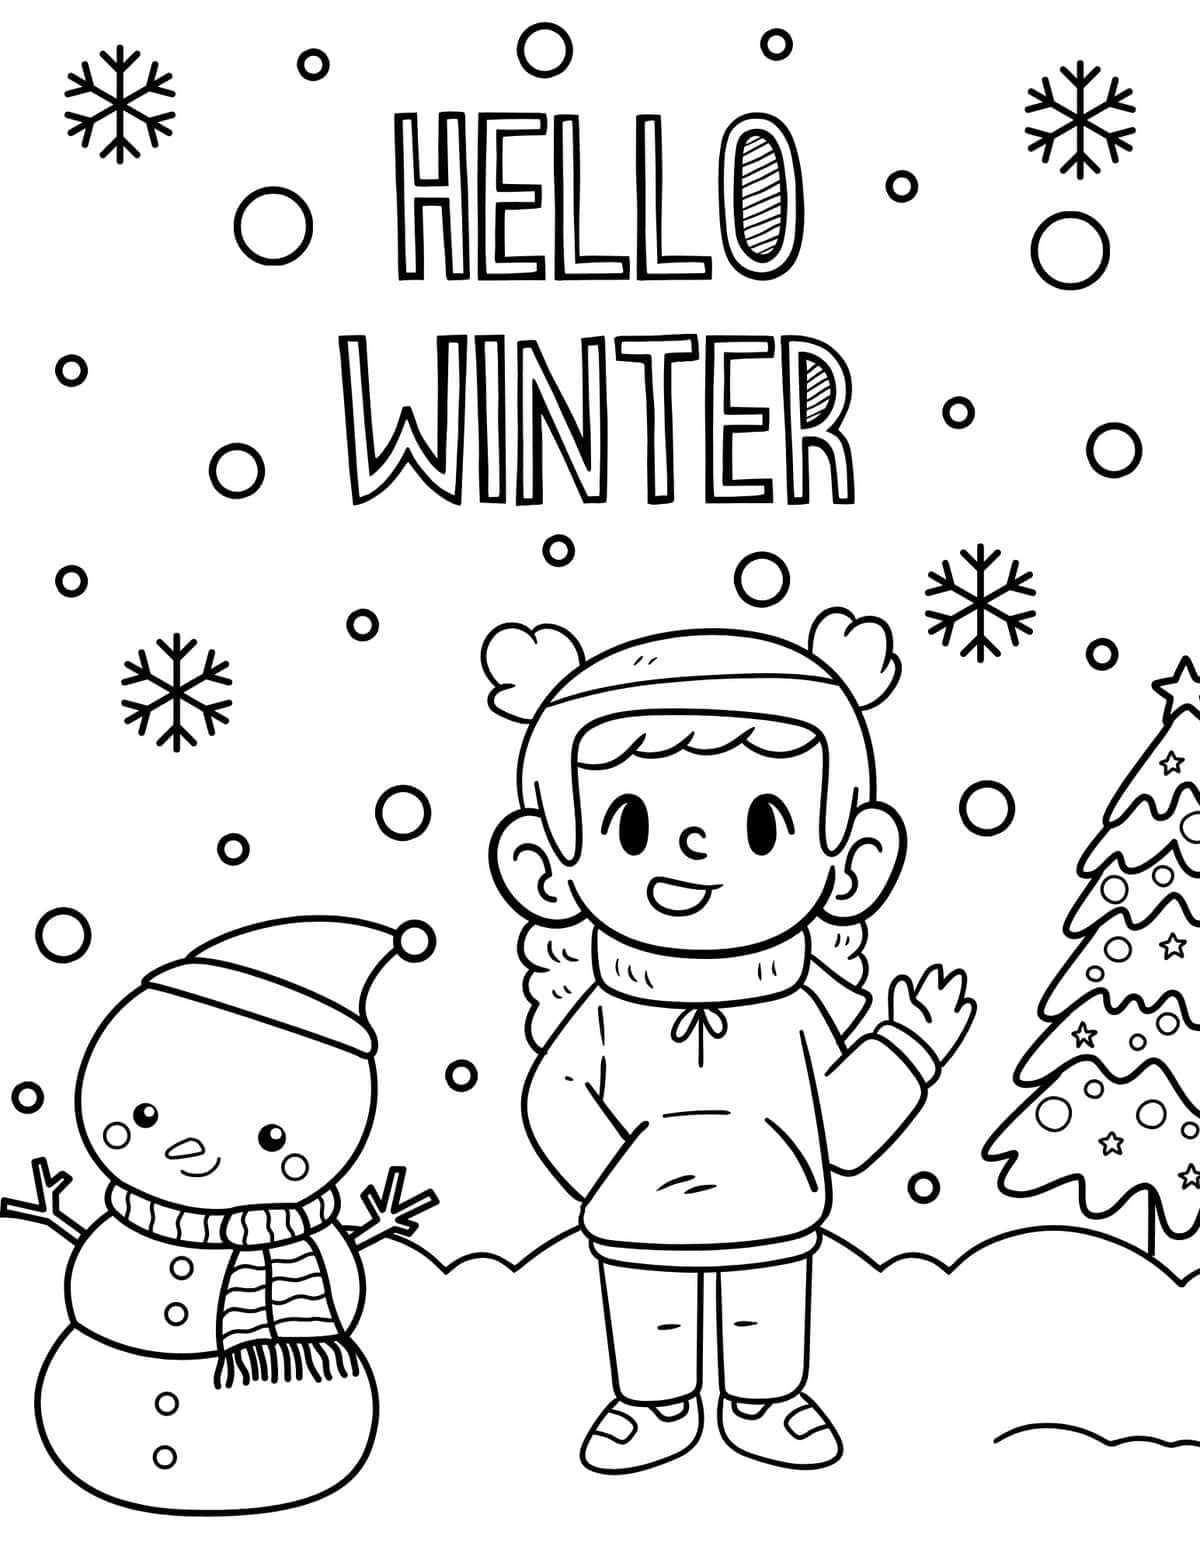 hello Winter coloring pages